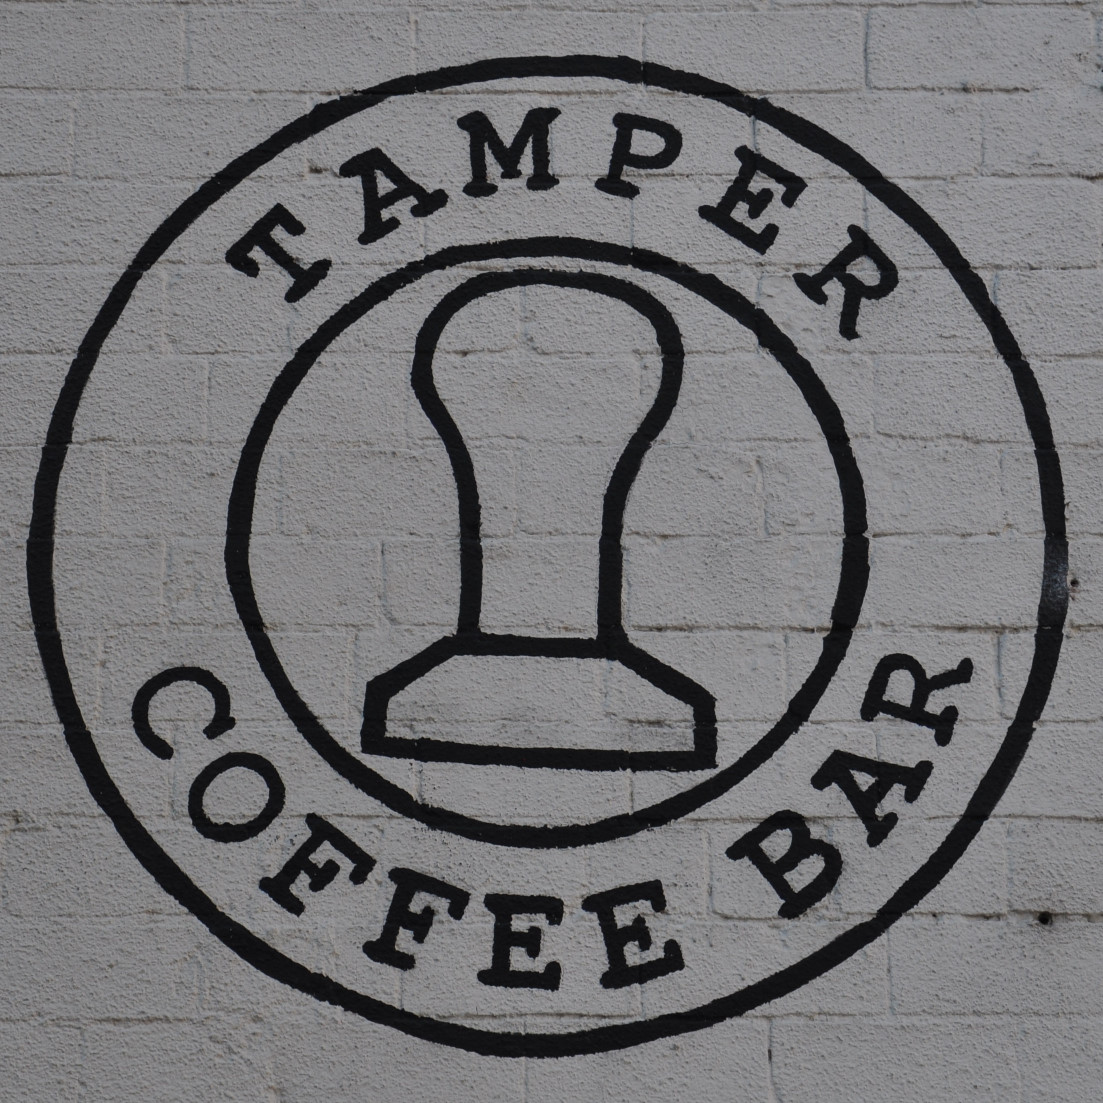 The Tamper Coffee logo painted in black on the whitewashed side of Sellers Wheel. The words "Tamper Coffee Bar" written in a ring around the outline of tamper.